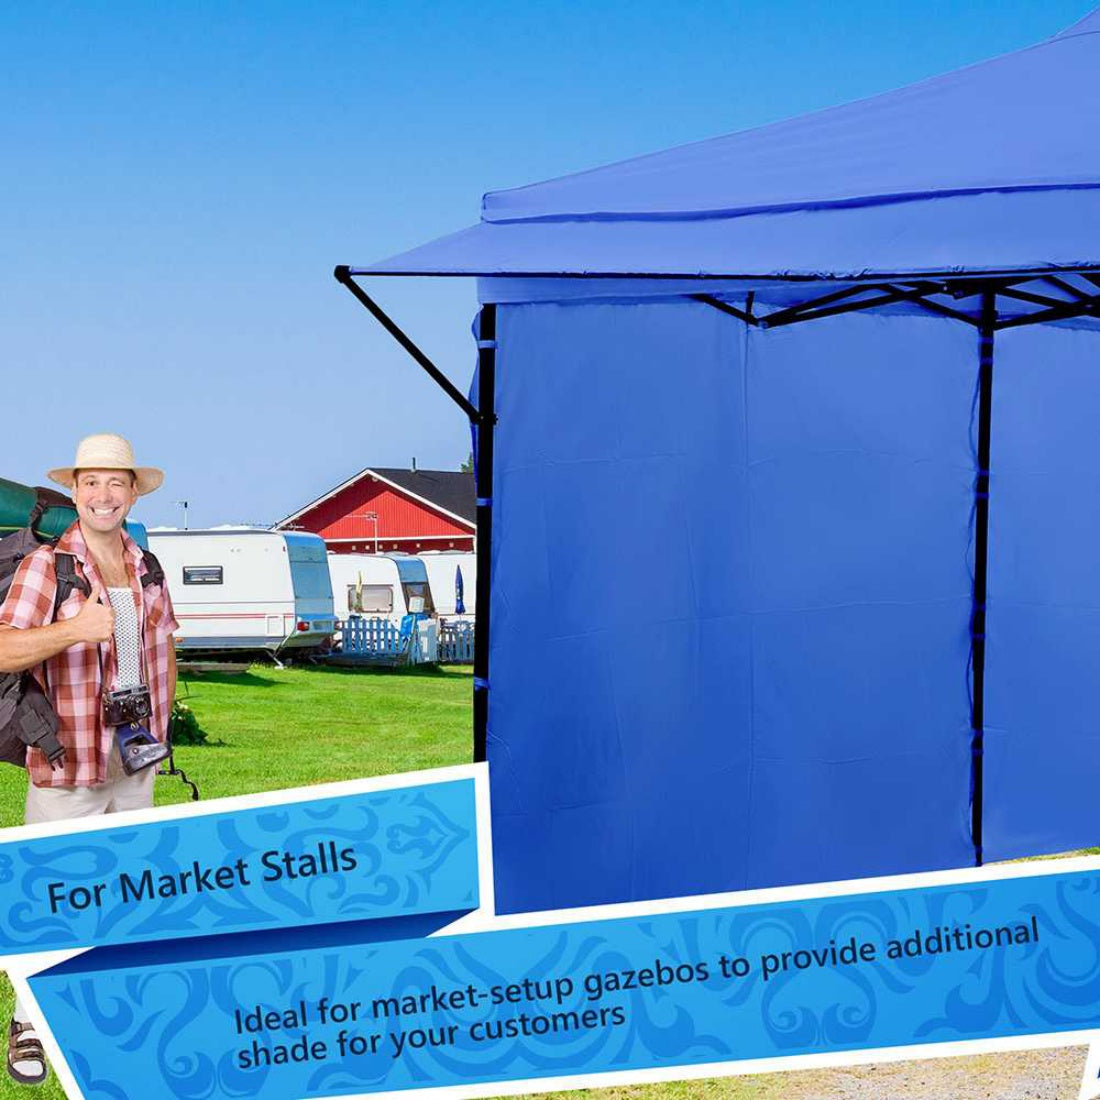 NEW PERFECT OASIS 3x6m Blue Pop Up Gazebo and 3mx68cm Eave Folding Marquee Tent